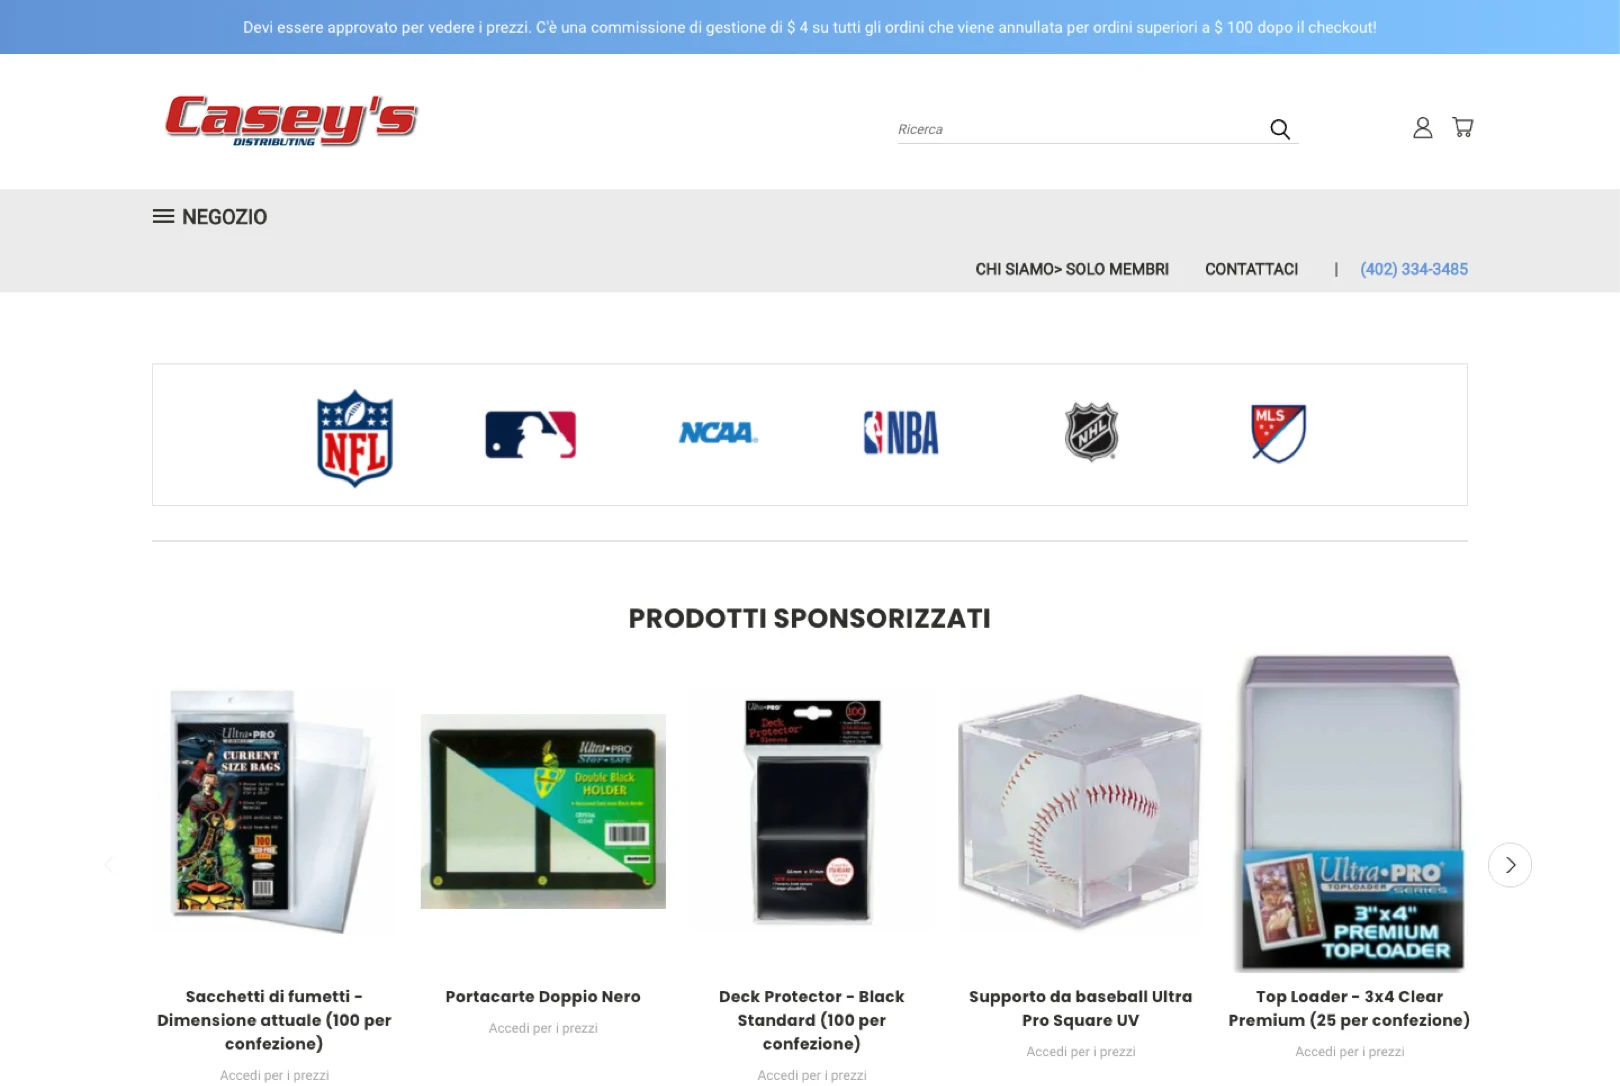 https://www-cdn.bigcommerce.com/assets/italian-storefront-featured-products-casey-distribution.png